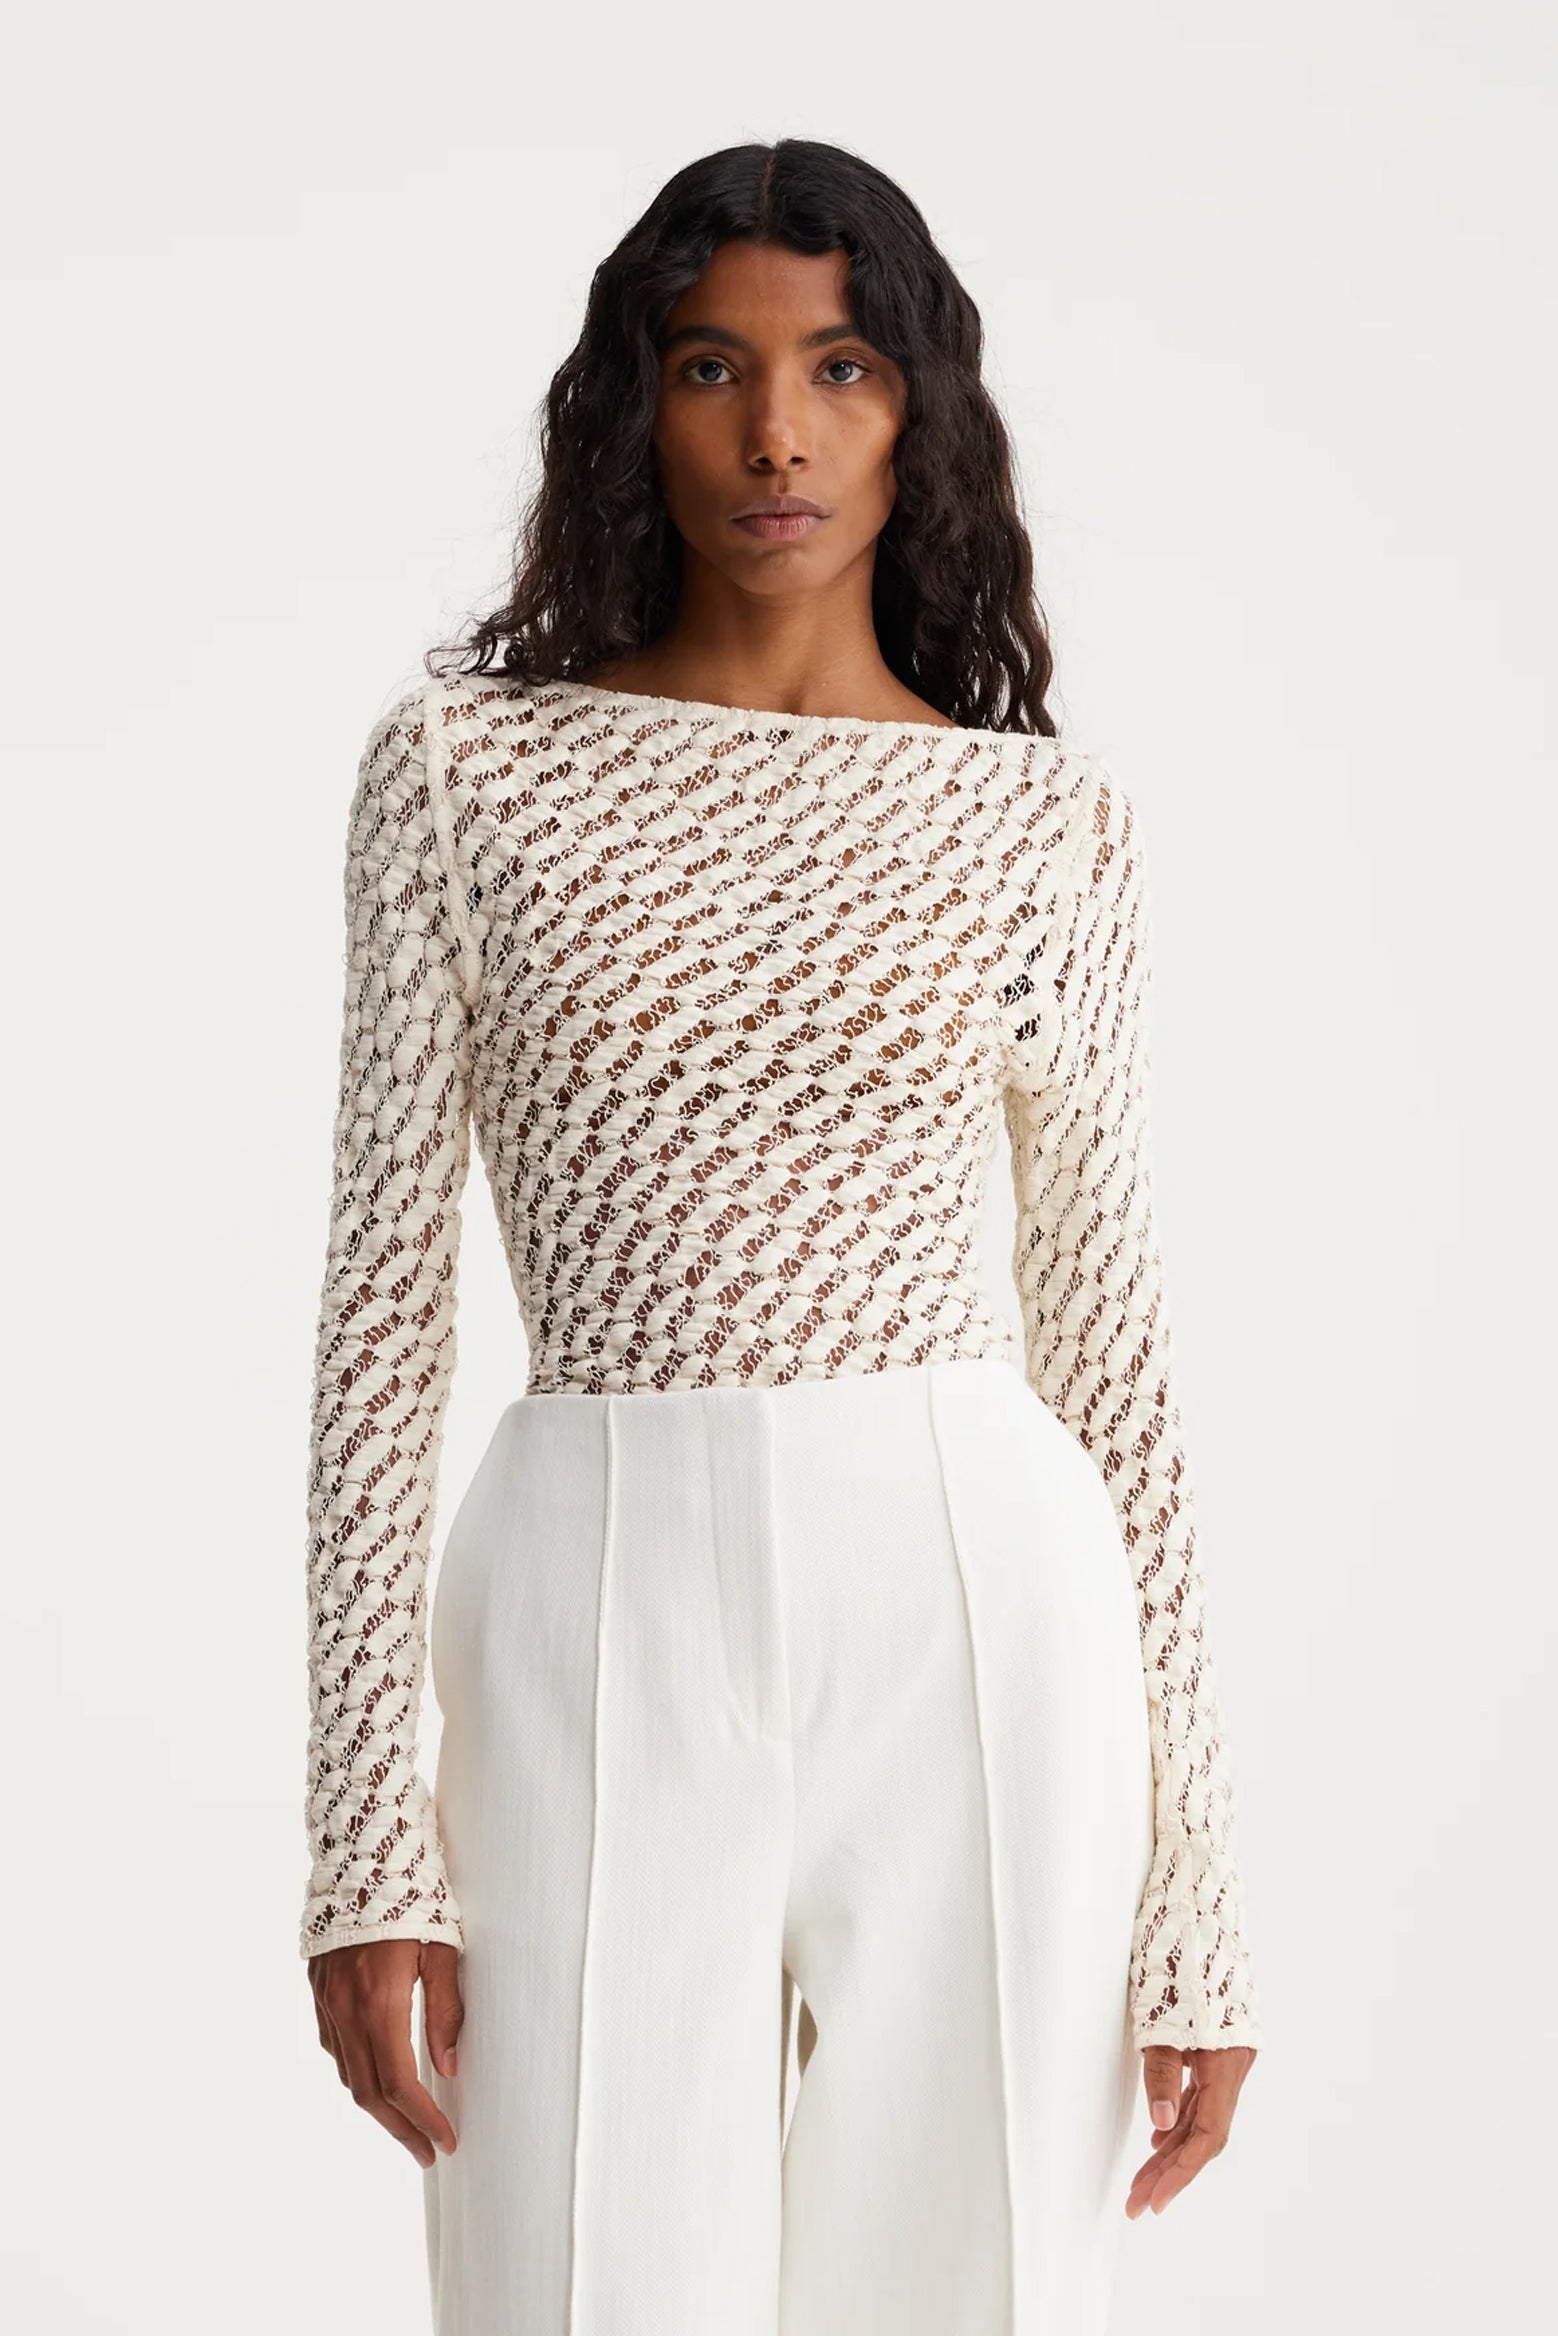 Rohe Lace Boat Neck Top in Cream available at The New Trend Australia.